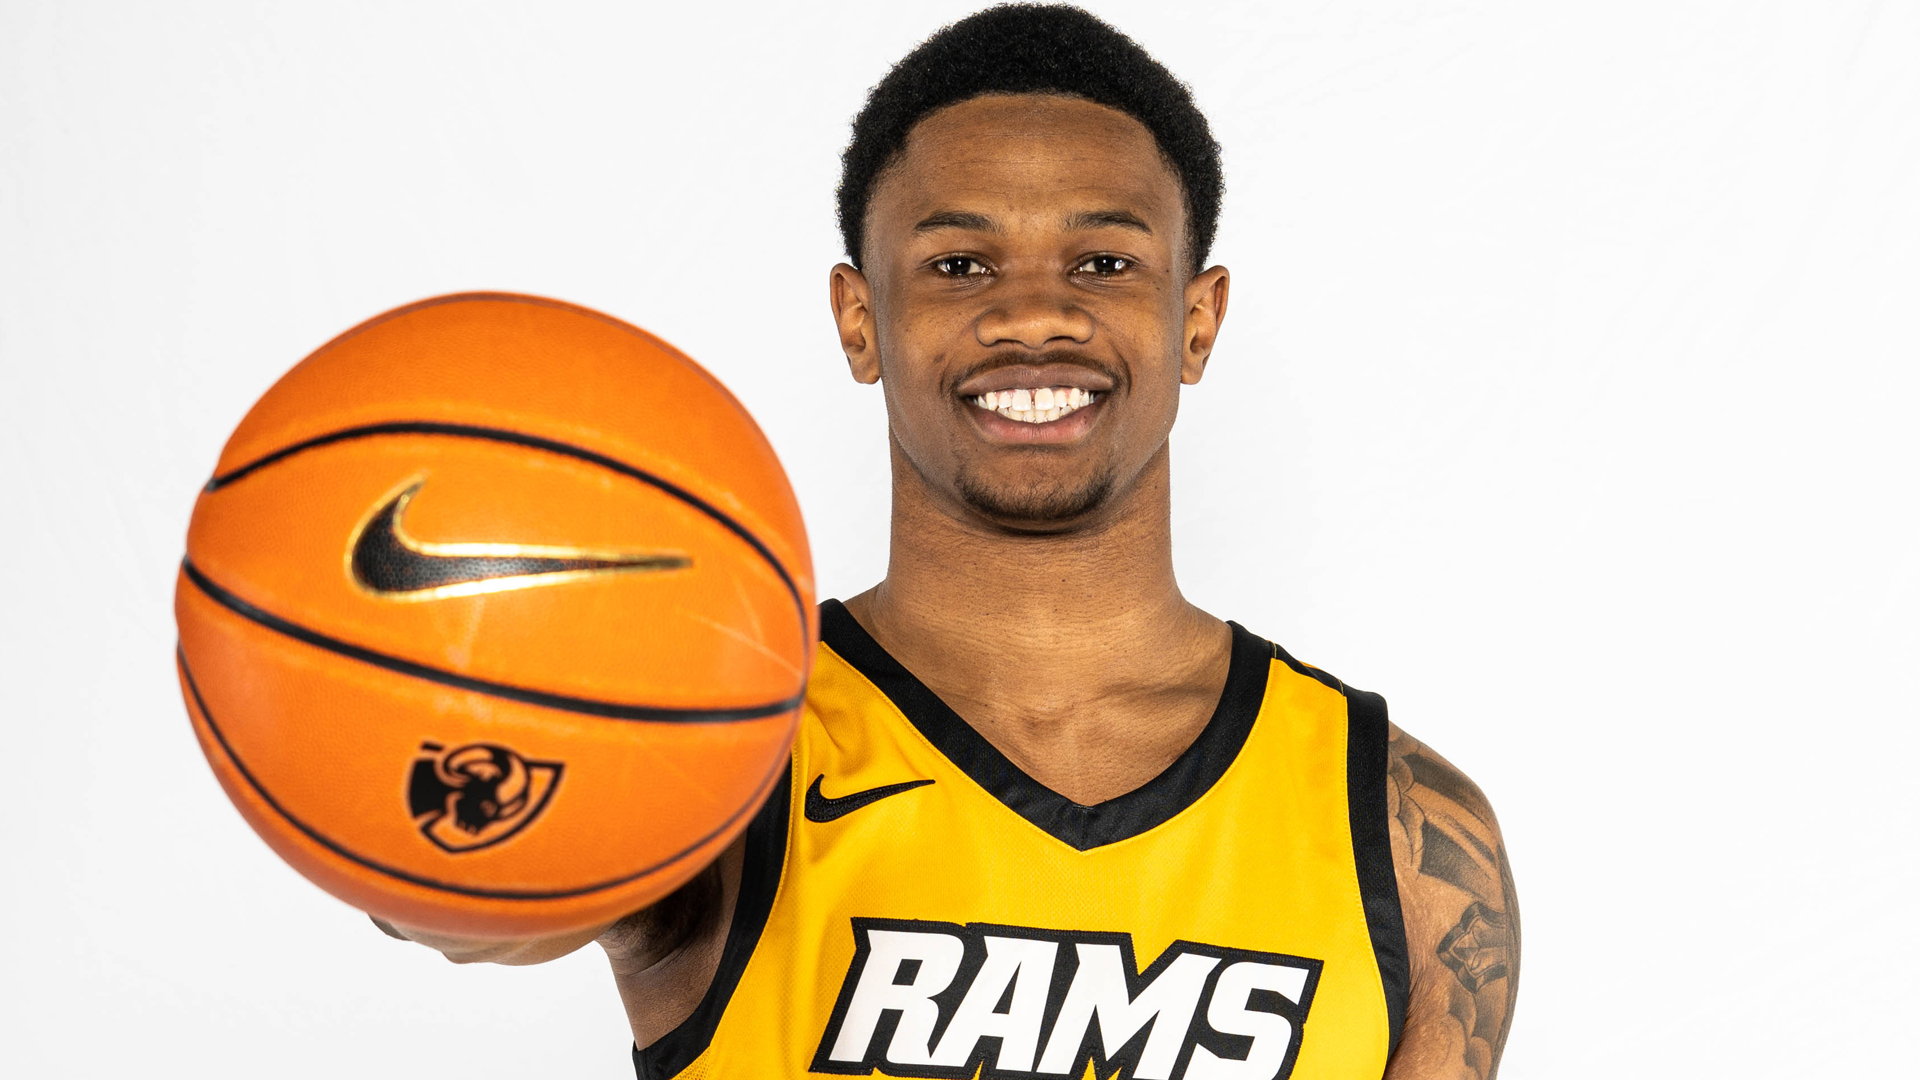 Zeb Jackson poses for a photo at VCU media day